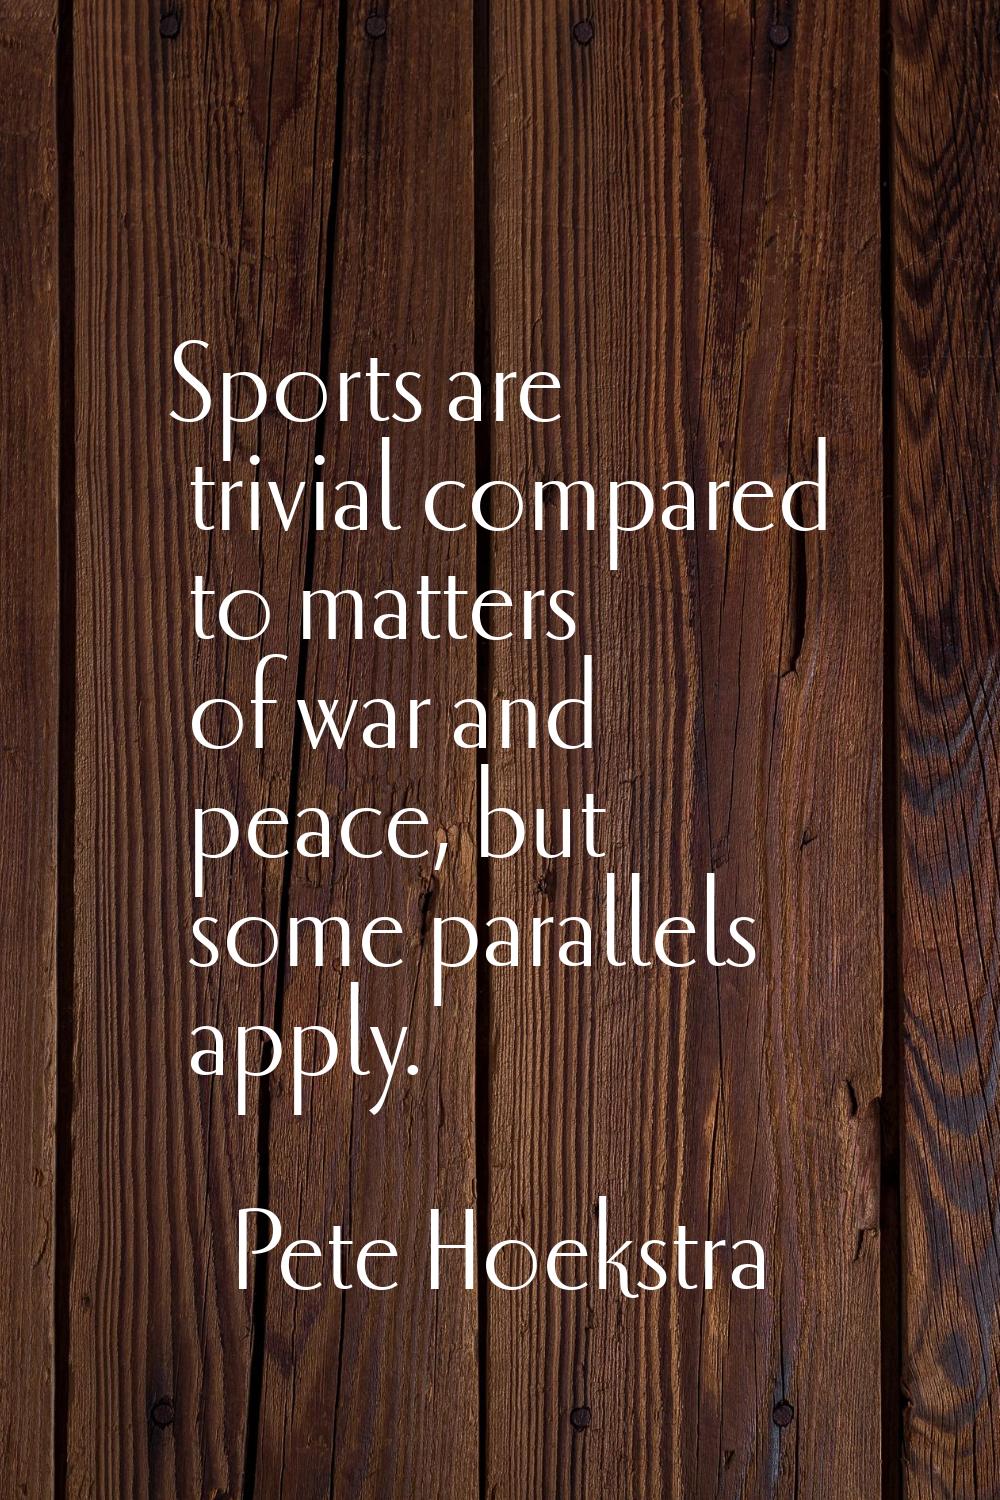 Sports are trivial compared to matters of war and peace, but some parallels apply.